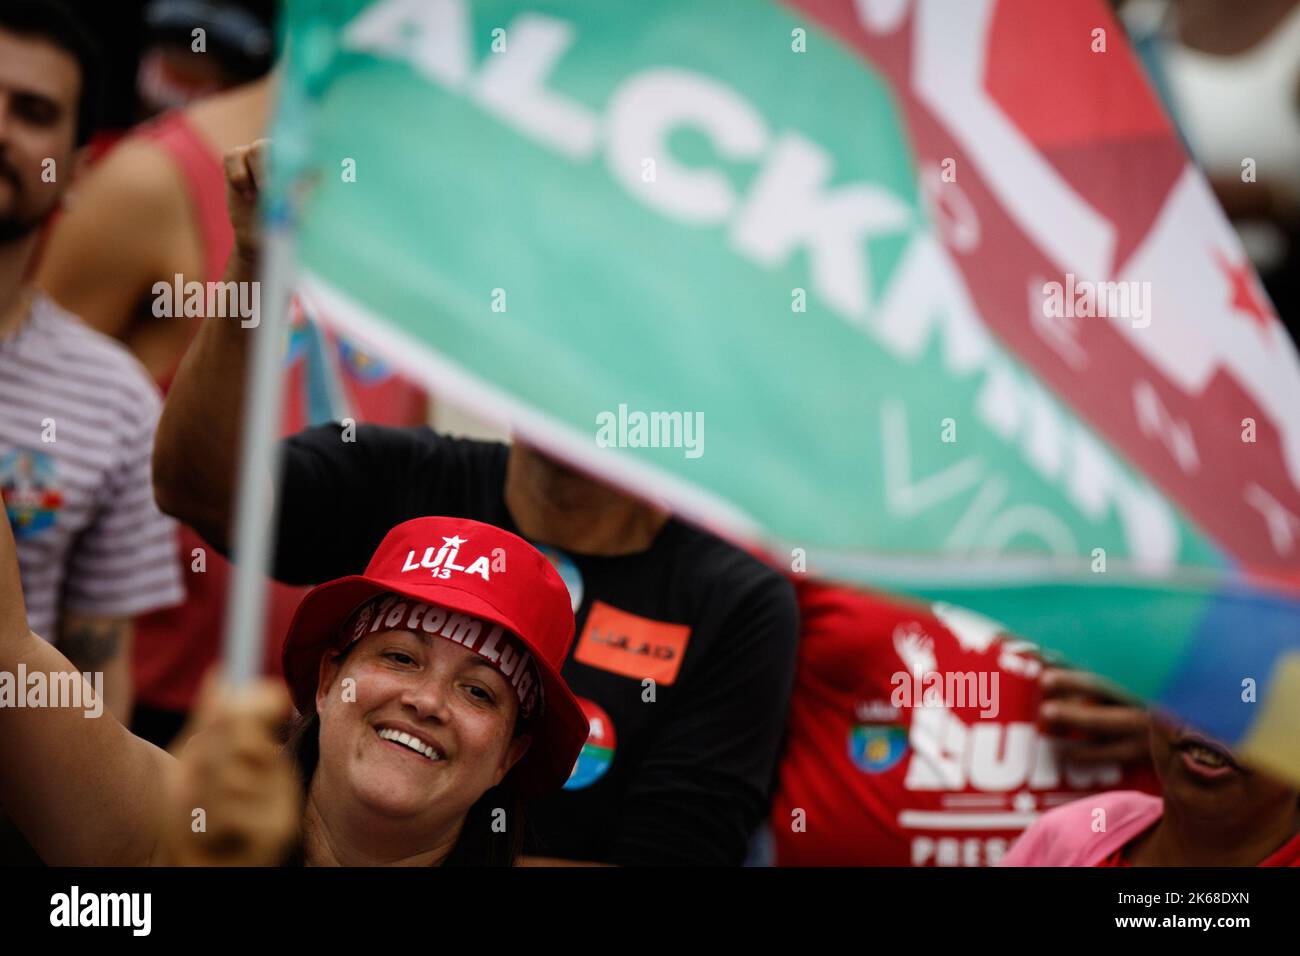 Rio De Janeiro, Brazil. 12th Oct, 2022. RJ - Rio de Janeiro - 10/12/2022 - RIO, LULA WALK AT THE ALEMAO COMPLEX - Supporters of presidential candidate Luiz Inacio Lula da Silva (PT) are seen this Wednesday morning (12), during a walk in Complexo do Alemao, as part of the campaign for the second round of presidential elections in Brazil. Photo: Joao Gabriel Alves/AGIF/Sipa USA Credit: Sipa USA/Alamy Live News Stock Photo